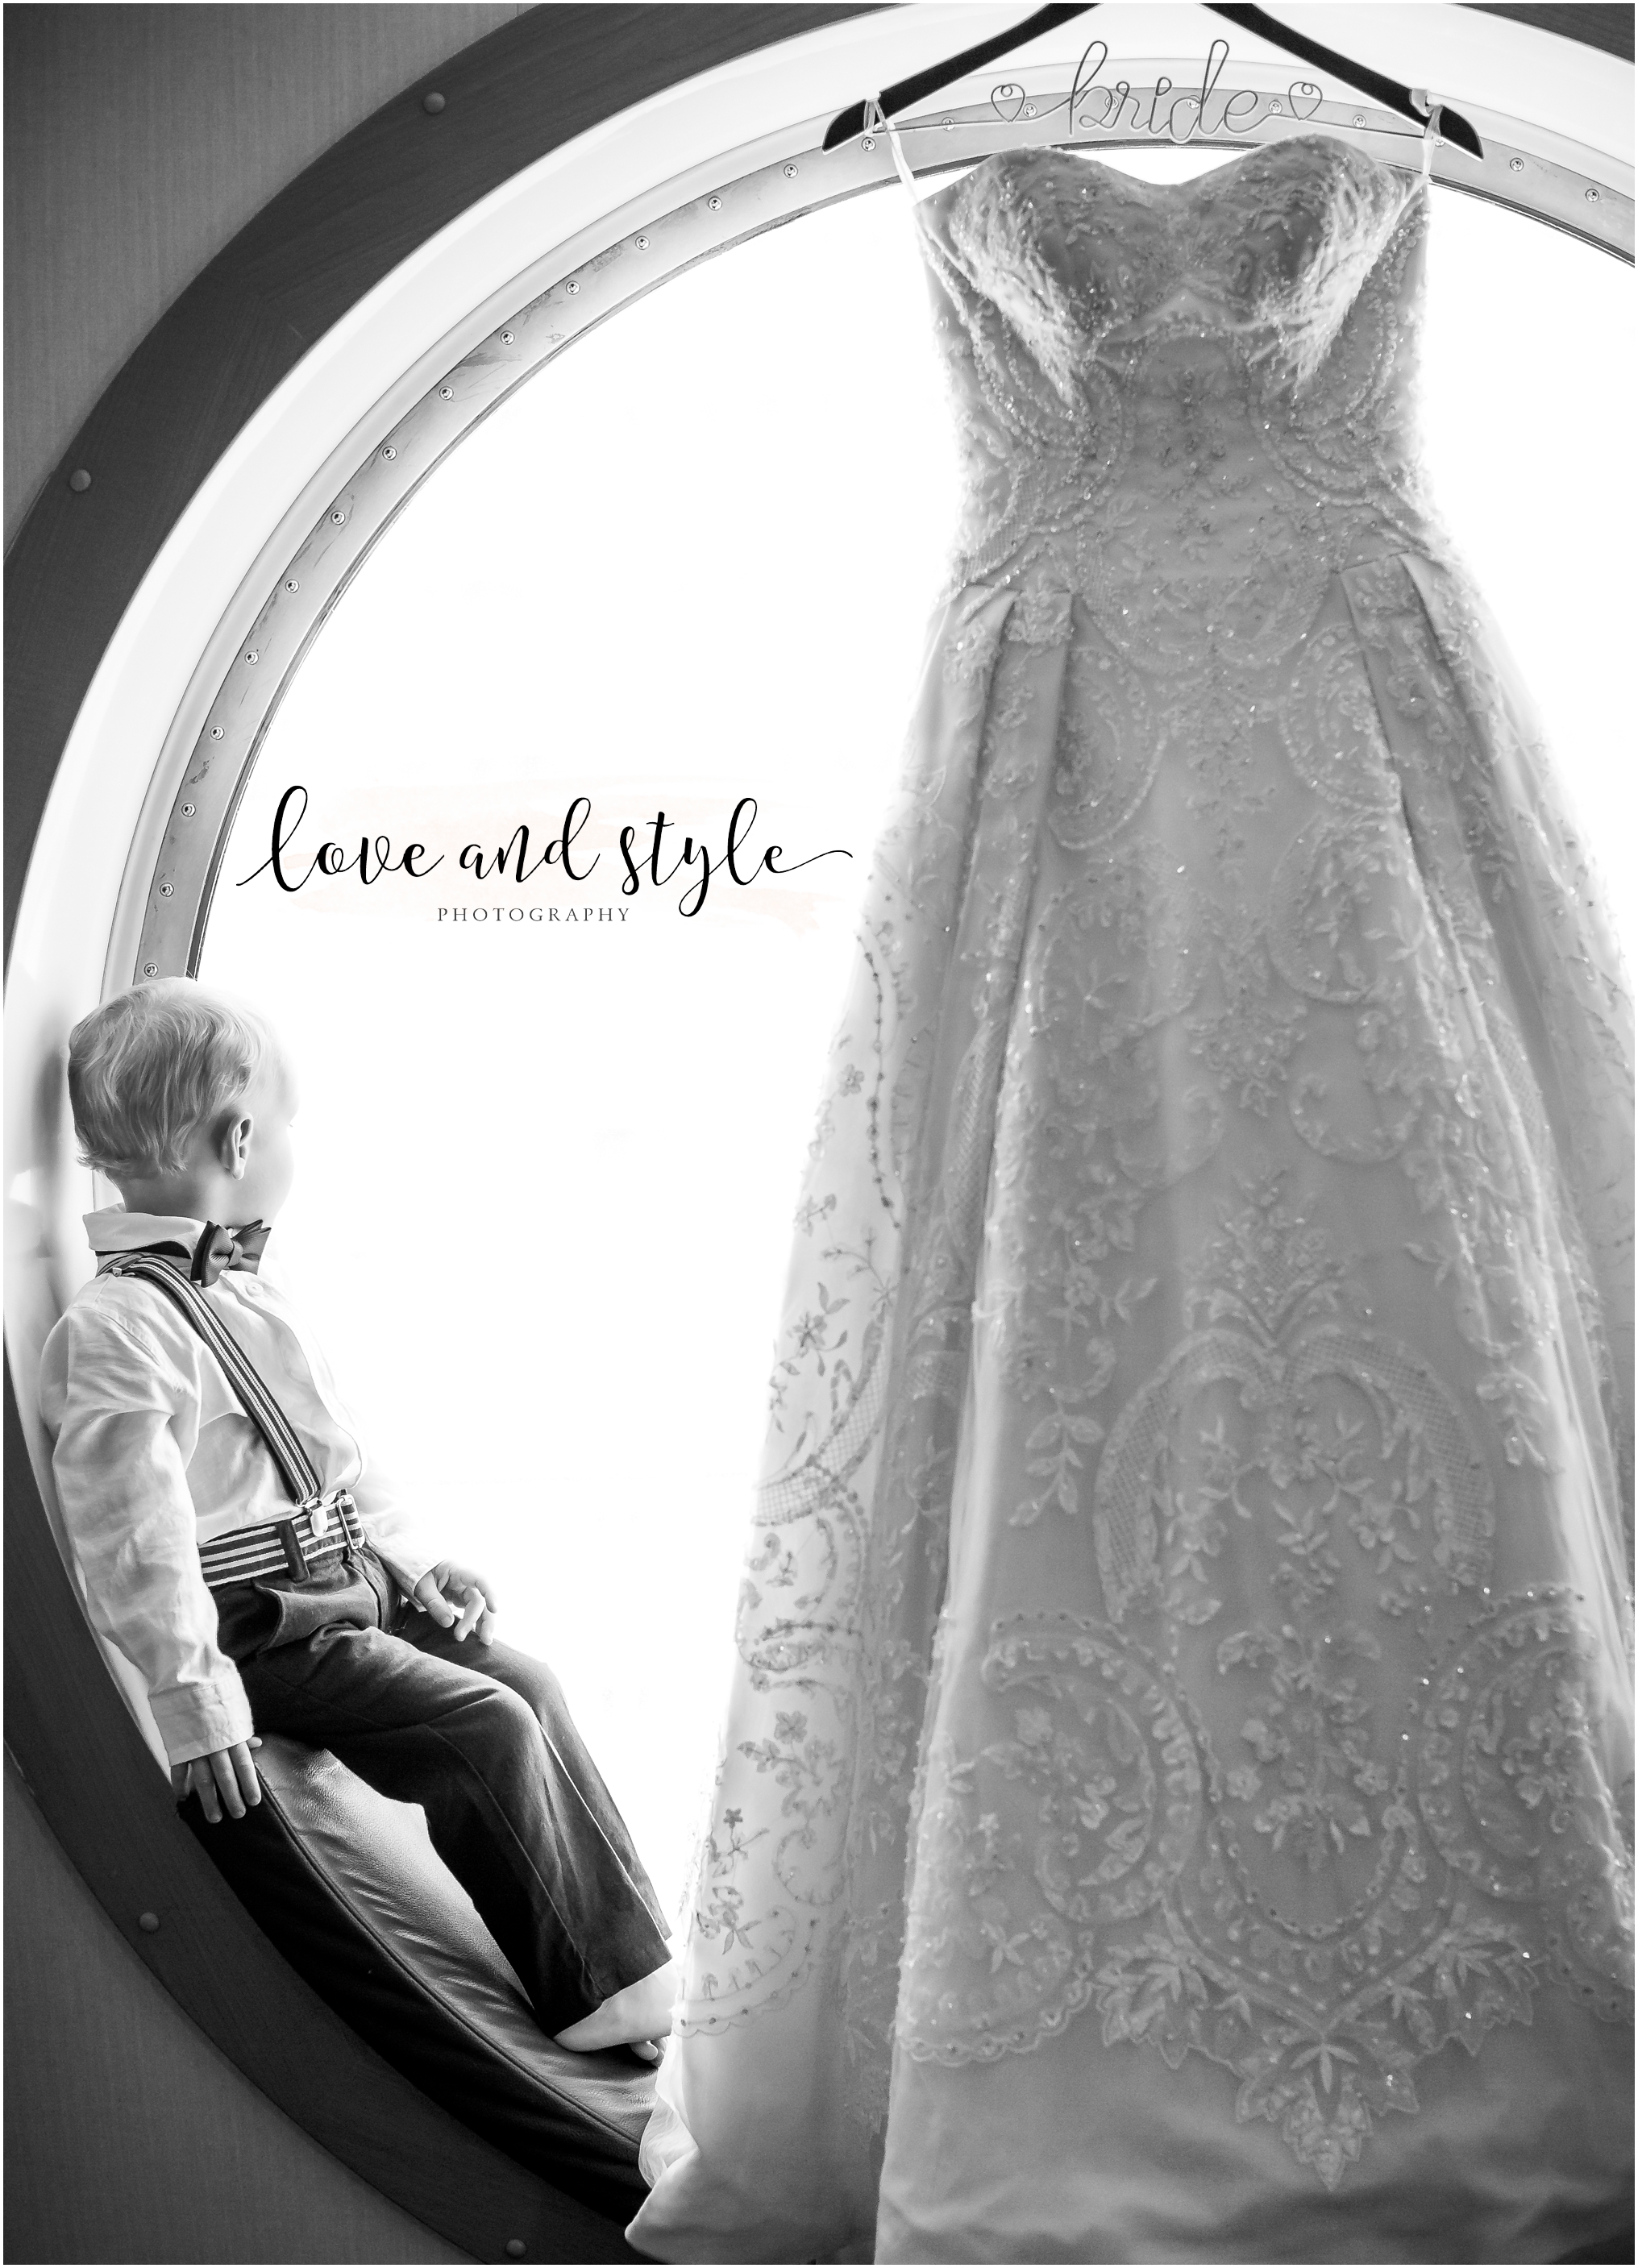 Disney Dream Cruise Wedding photo of the brides wedding dress and two year old son